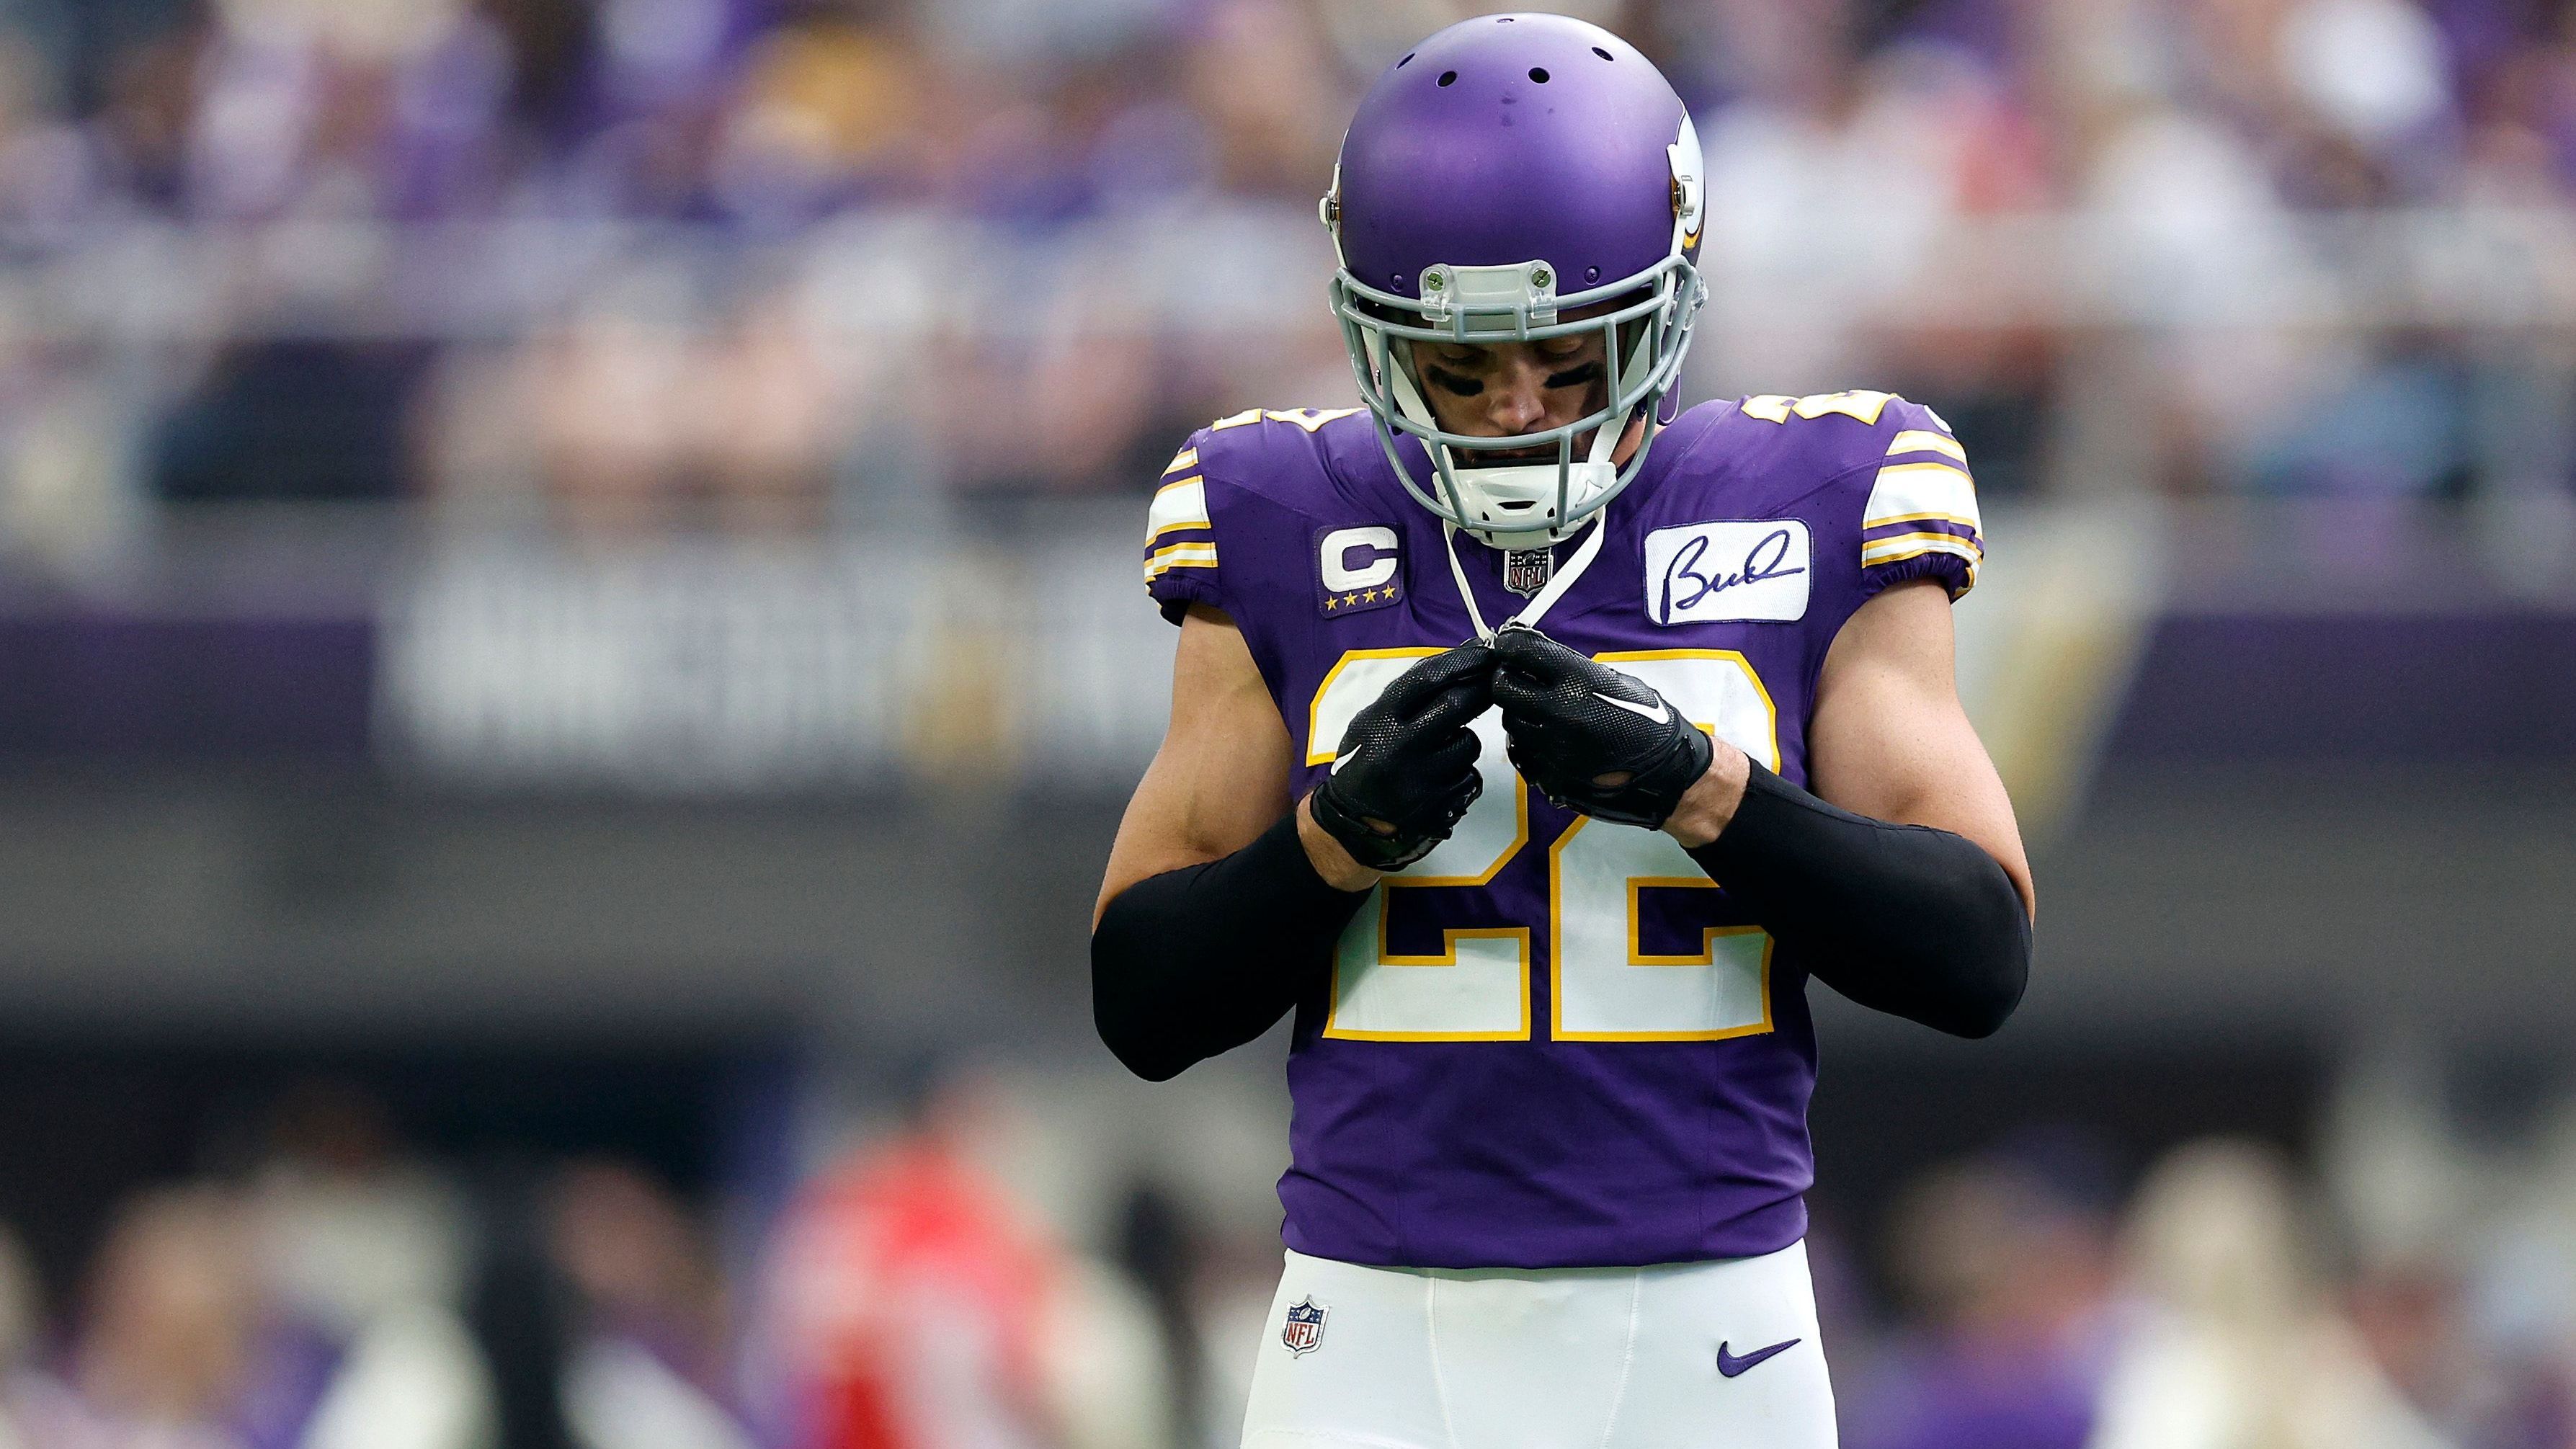 <strong>Interceptions</strong><br>1. Harrison Smith (im Bild): 34 Interceptions<br>2. Tyrann Mathieu: 33 Interceptions<br>3. Kevin Byard, Darius Slay: 28 Interceptions